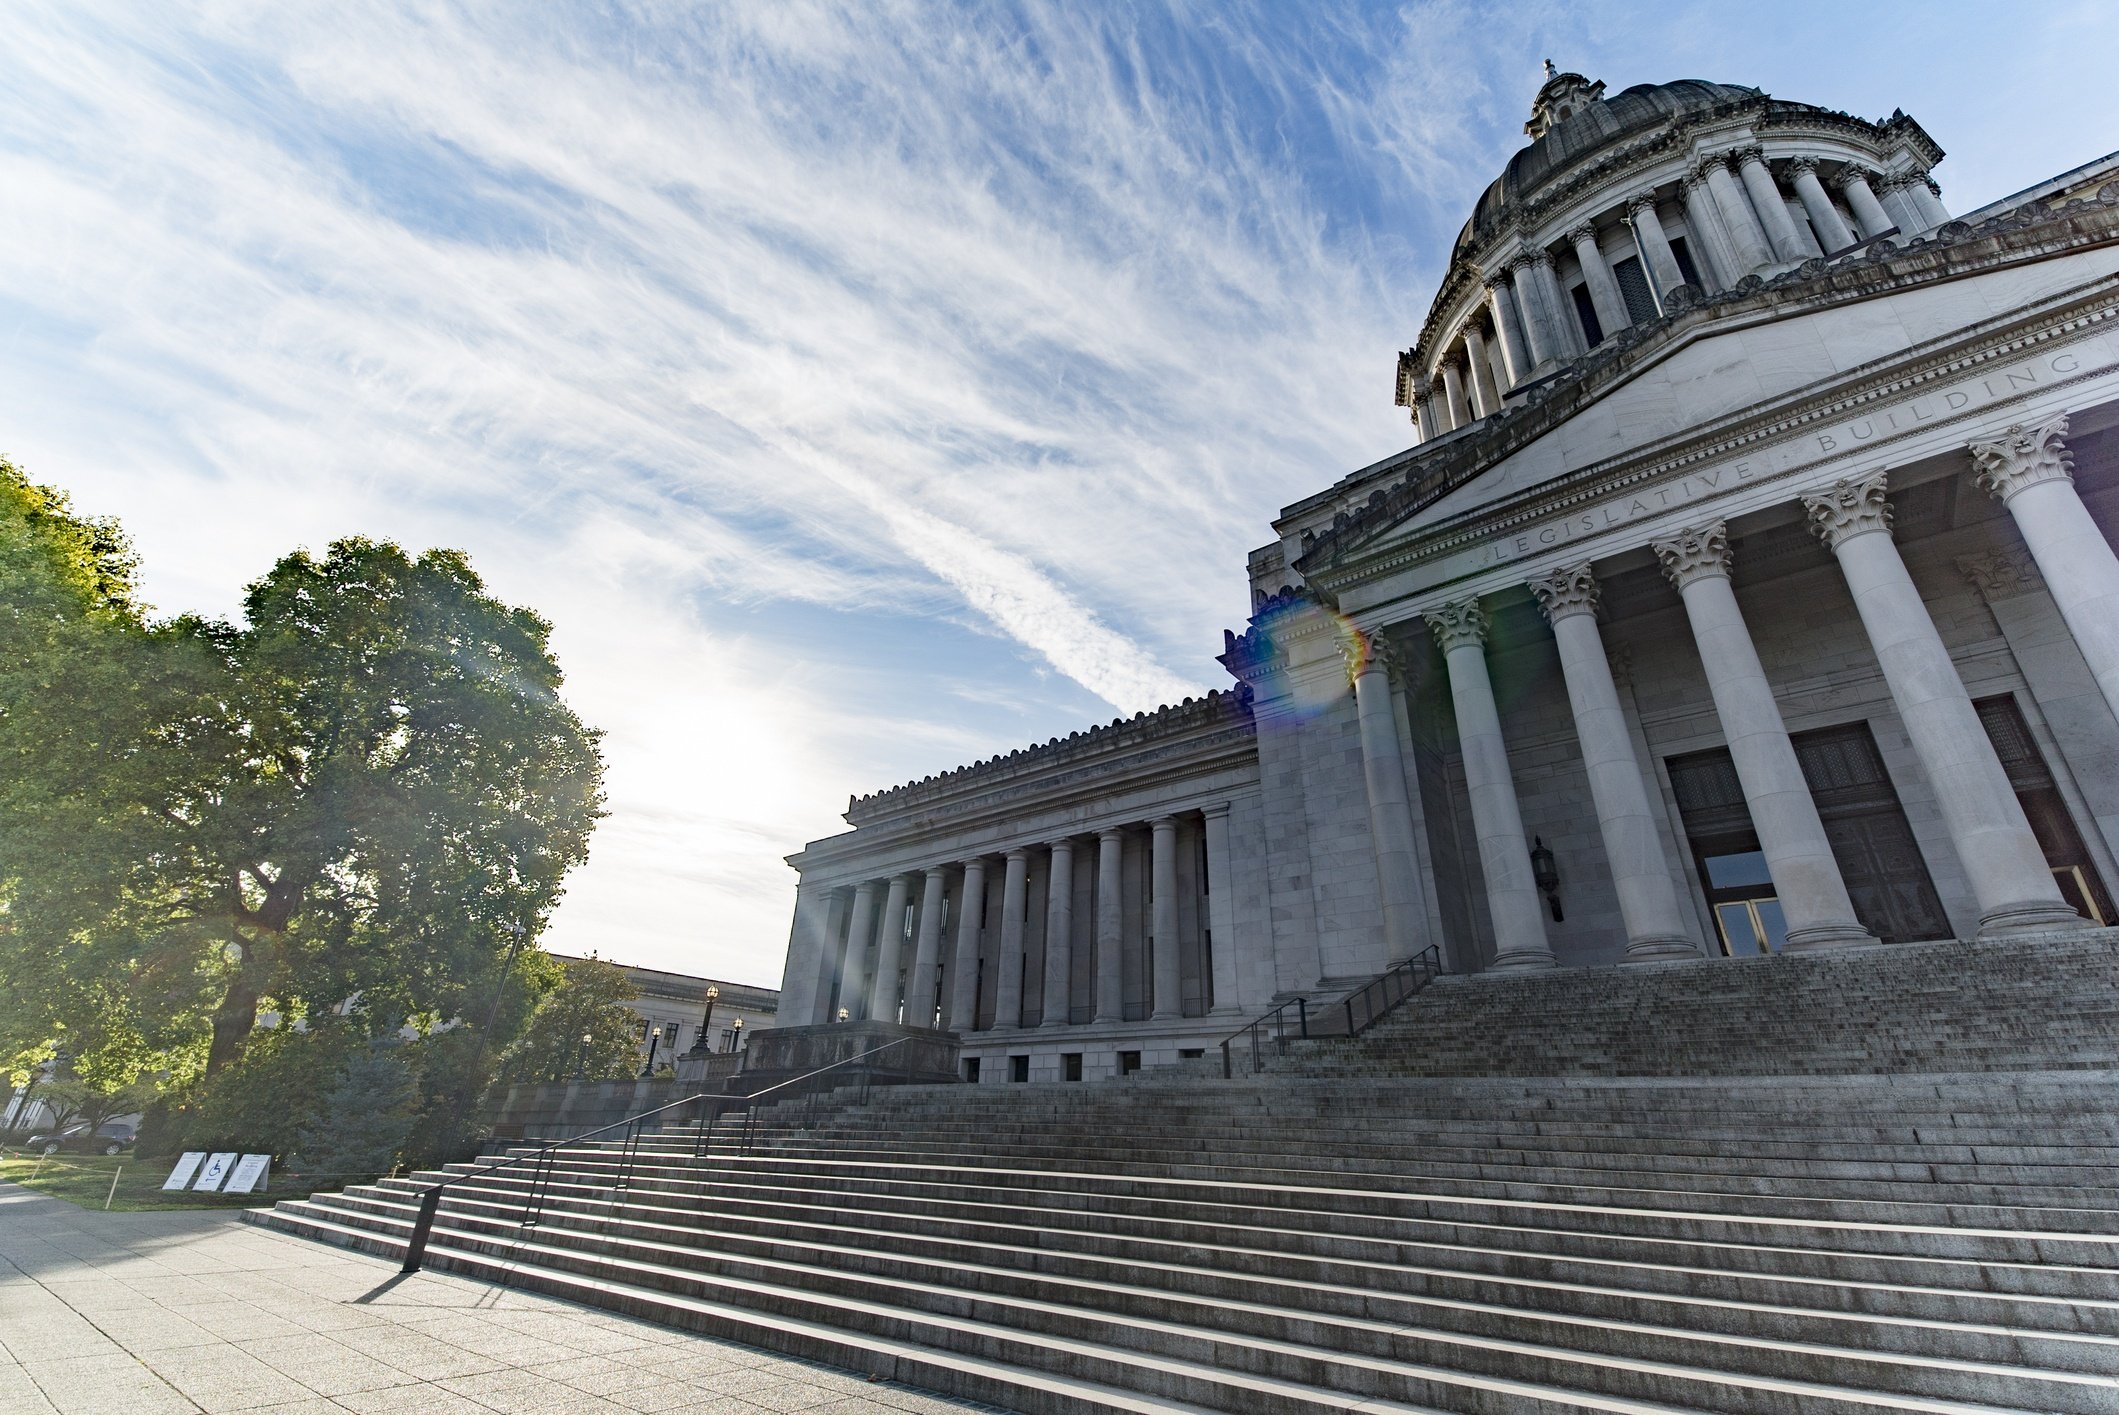 The Washington State Capitol building under a partly cloudy sky